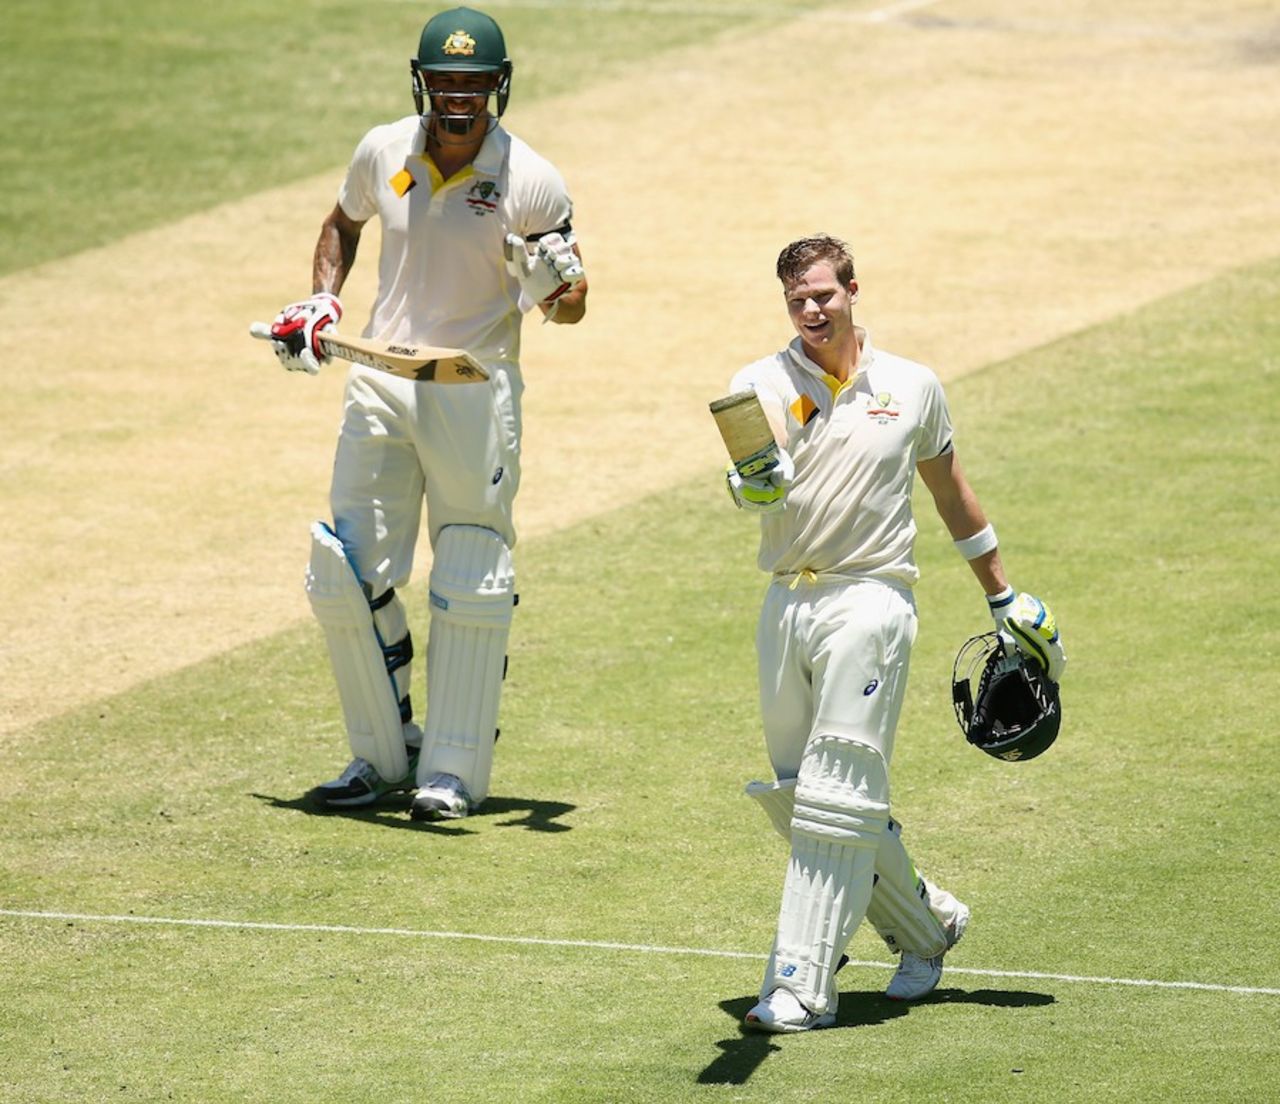 Steven Smith acknowledges the cheers on reaching his hundred, Australia v India, 2nd Test, Brisbane, 3rd day, December 19, 2014